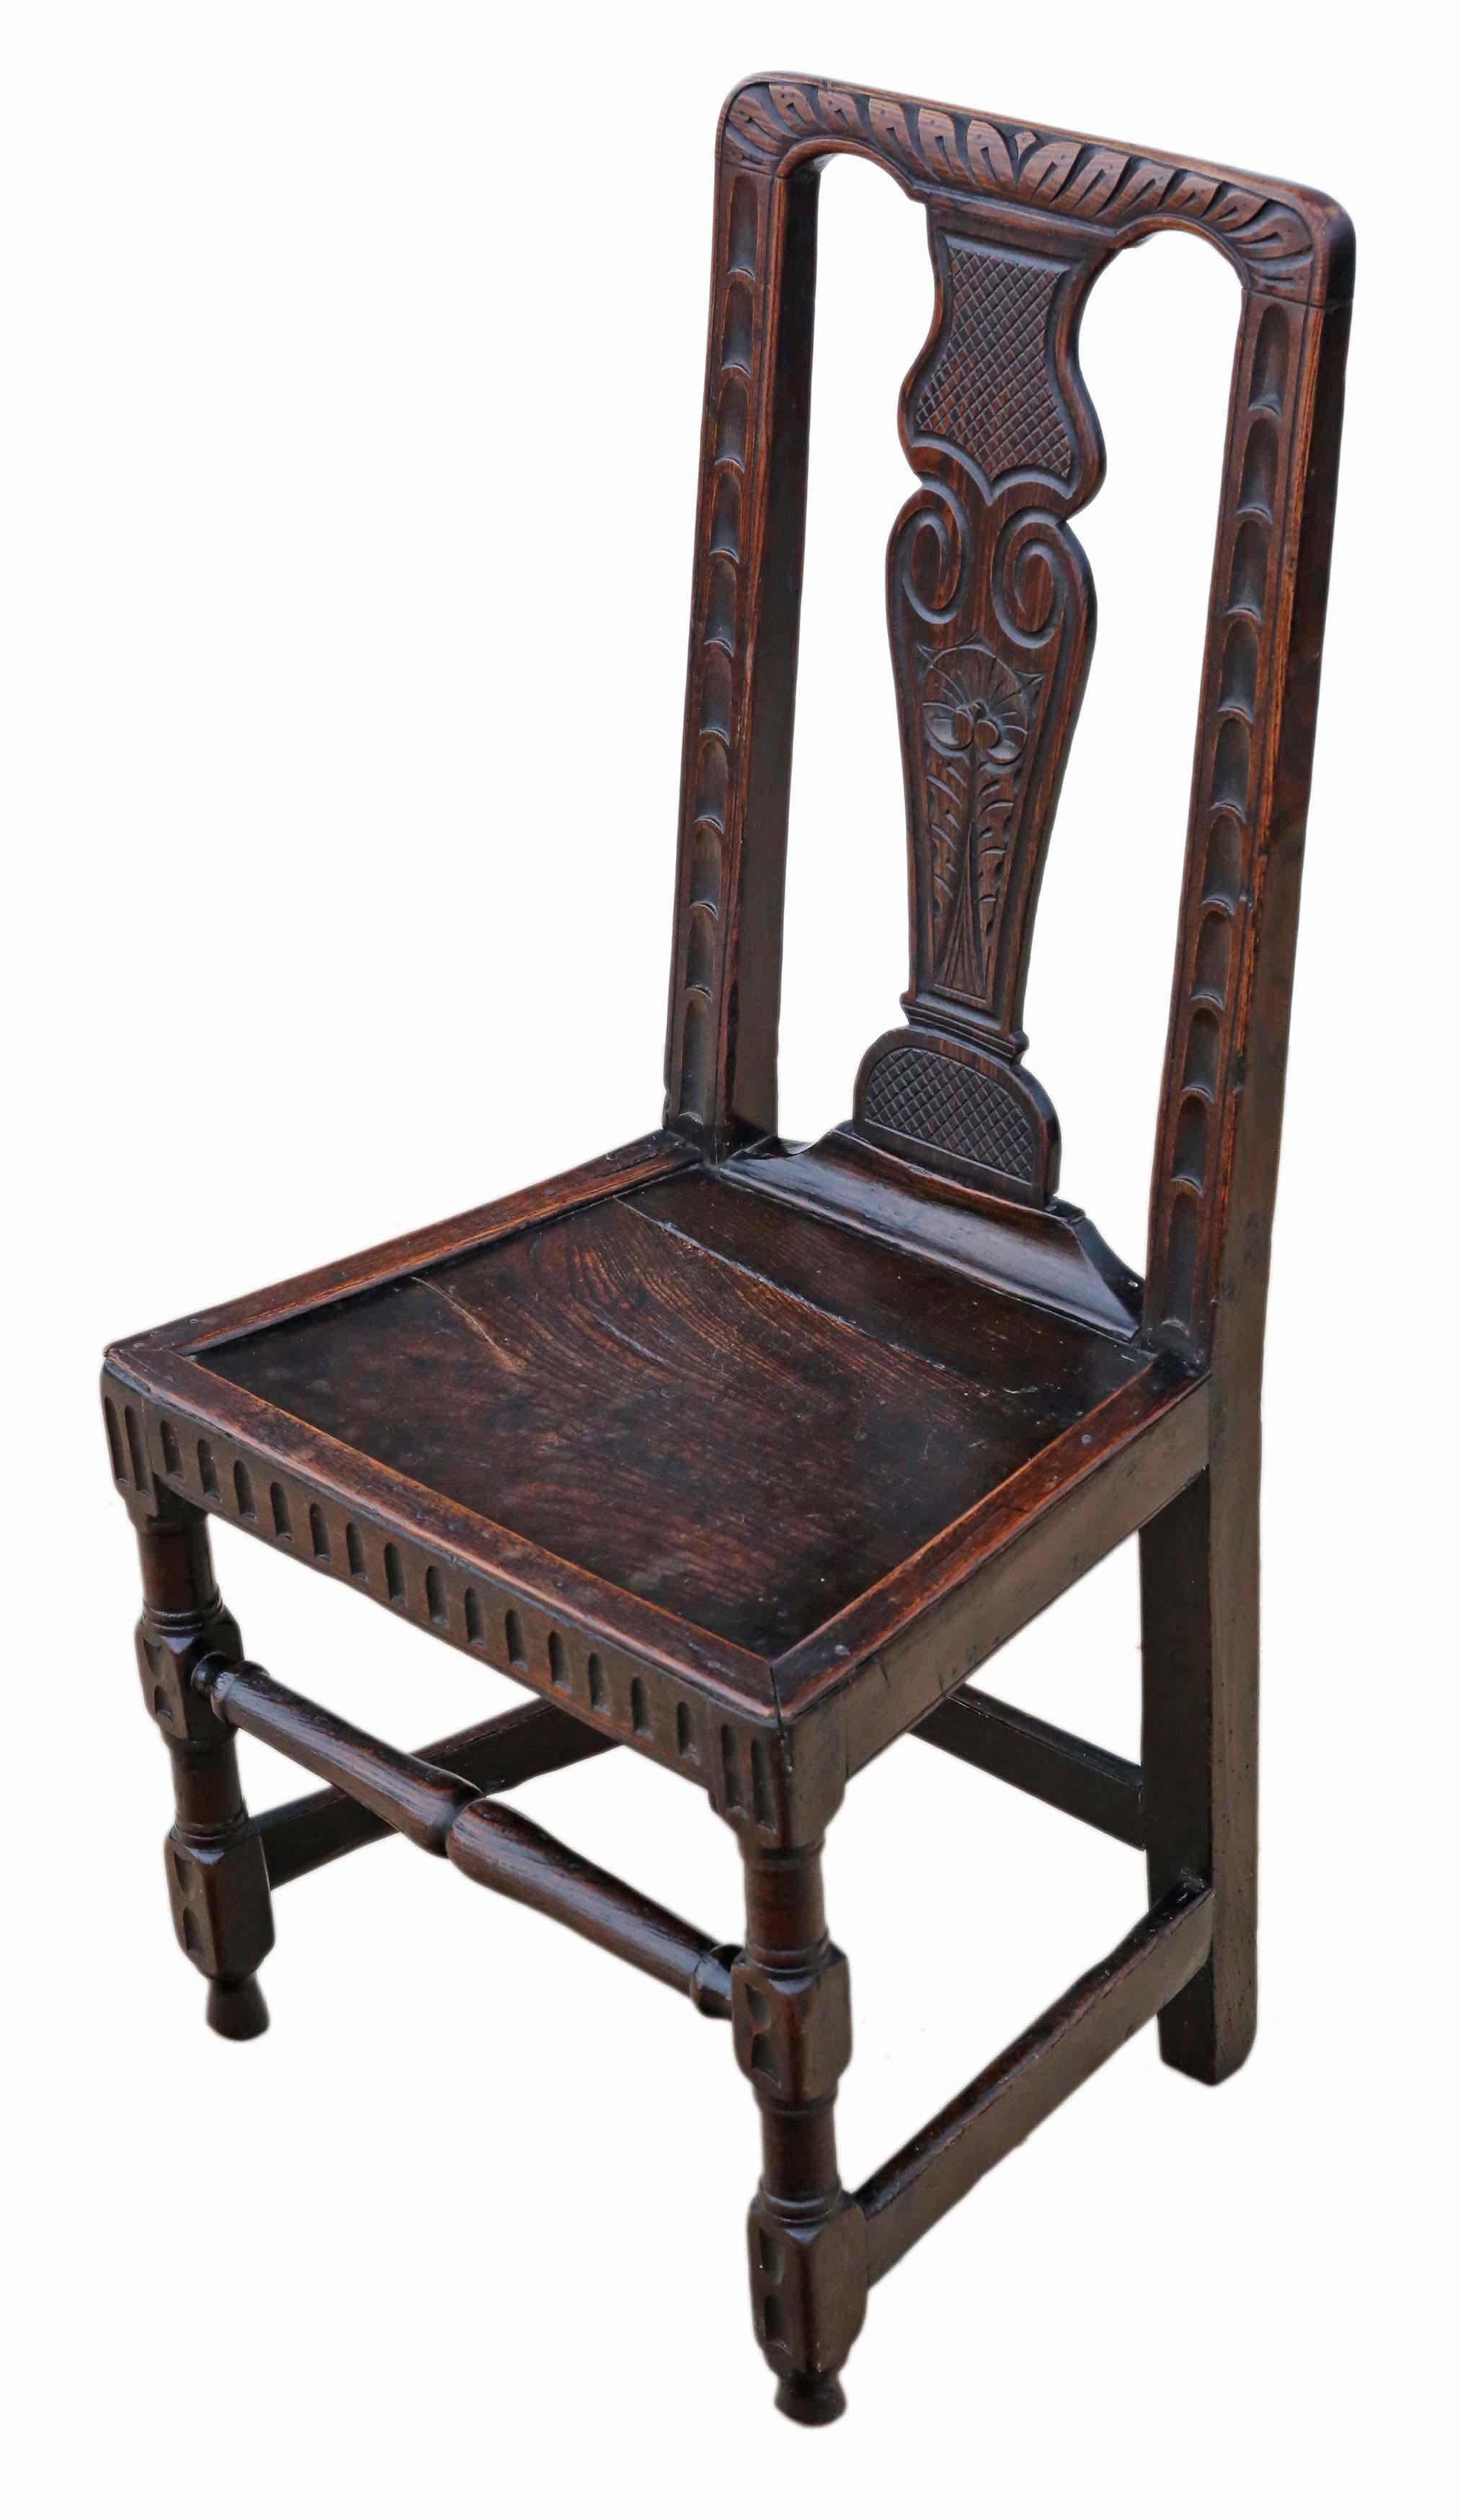 Georgian 18th century oak hall, side or occasional decorative chair.
Solid, heavy and strong with no loose joints.
Overall maximum dimensions:
48 cm W x 47 cm D x 98 cm H (42 cm H seat).
In good antique condition with historic knocks, marks,